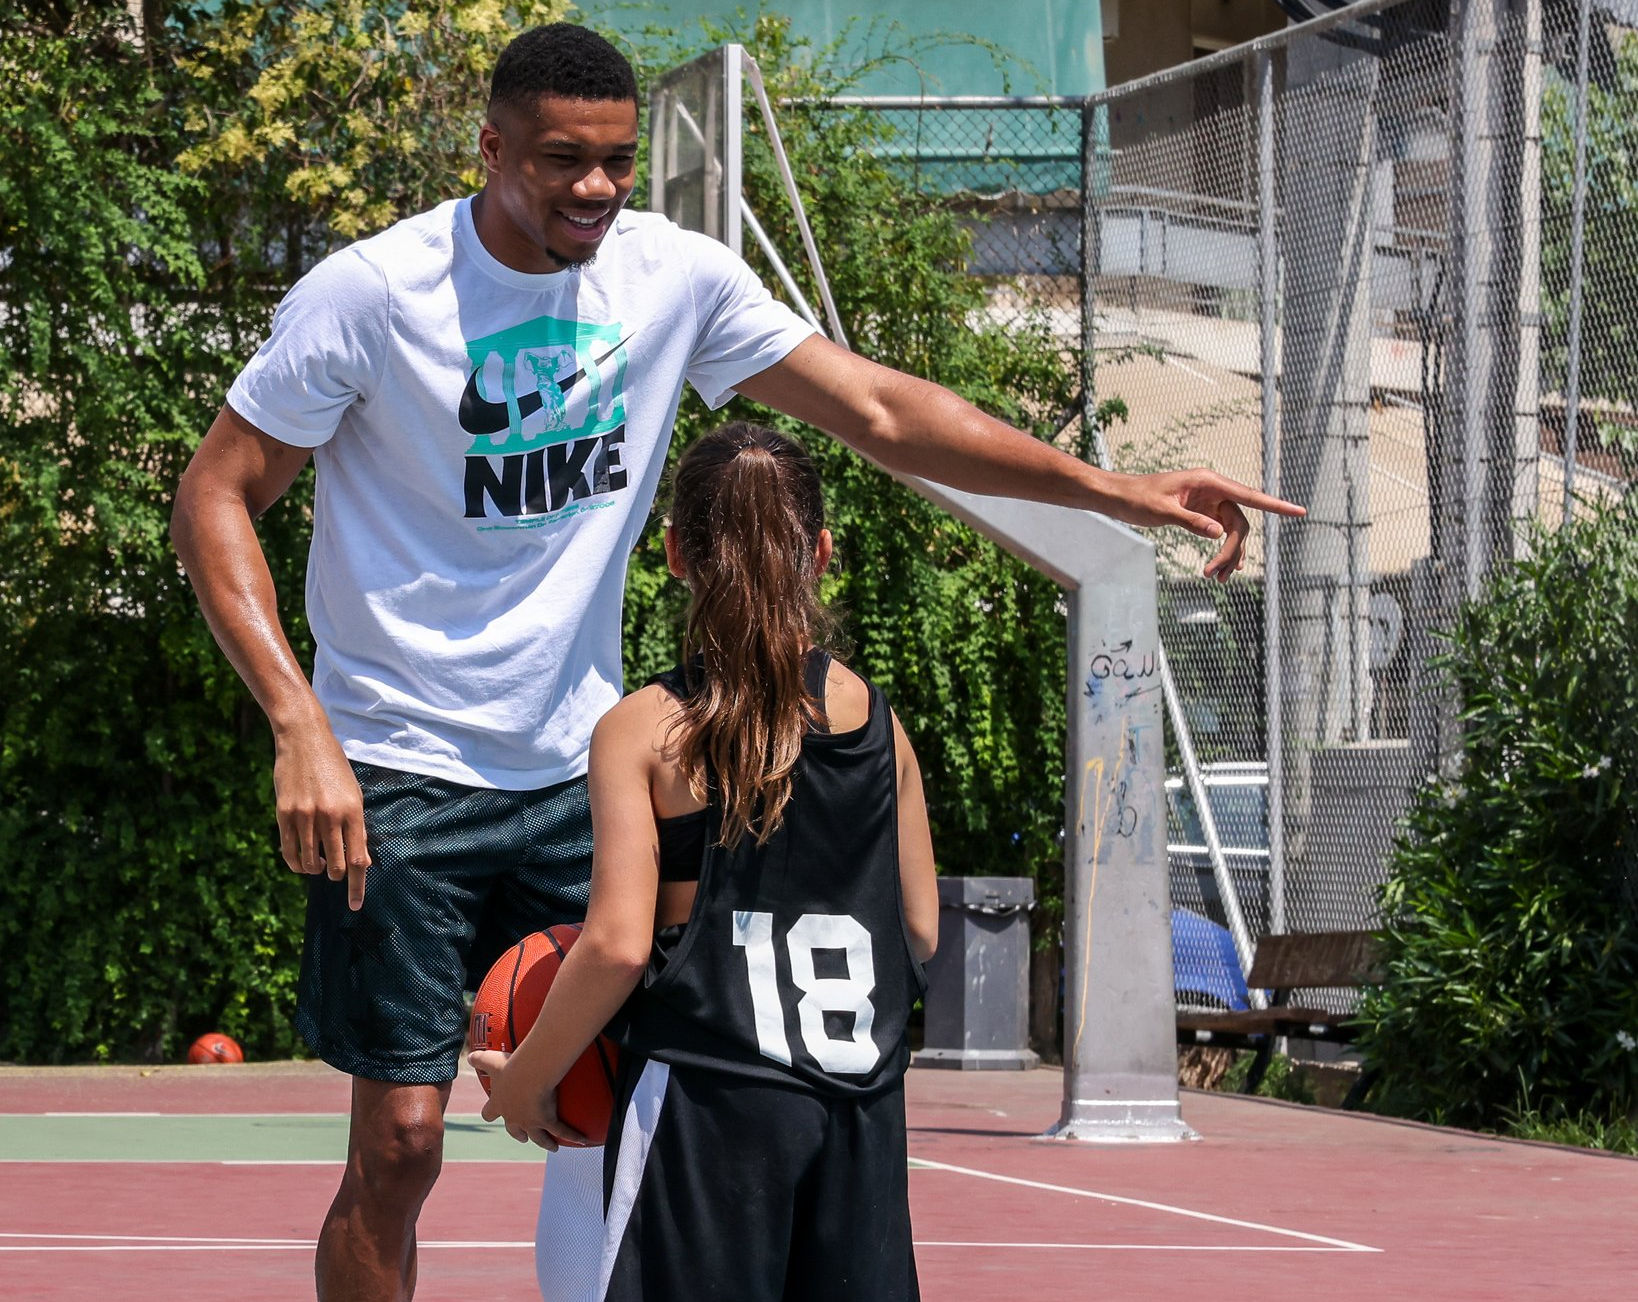 Antetokounbros Academy: Ο Giannis έπαιξε μπάσκετ με παιδιά «σαν τον παλιό καλό καιρό»